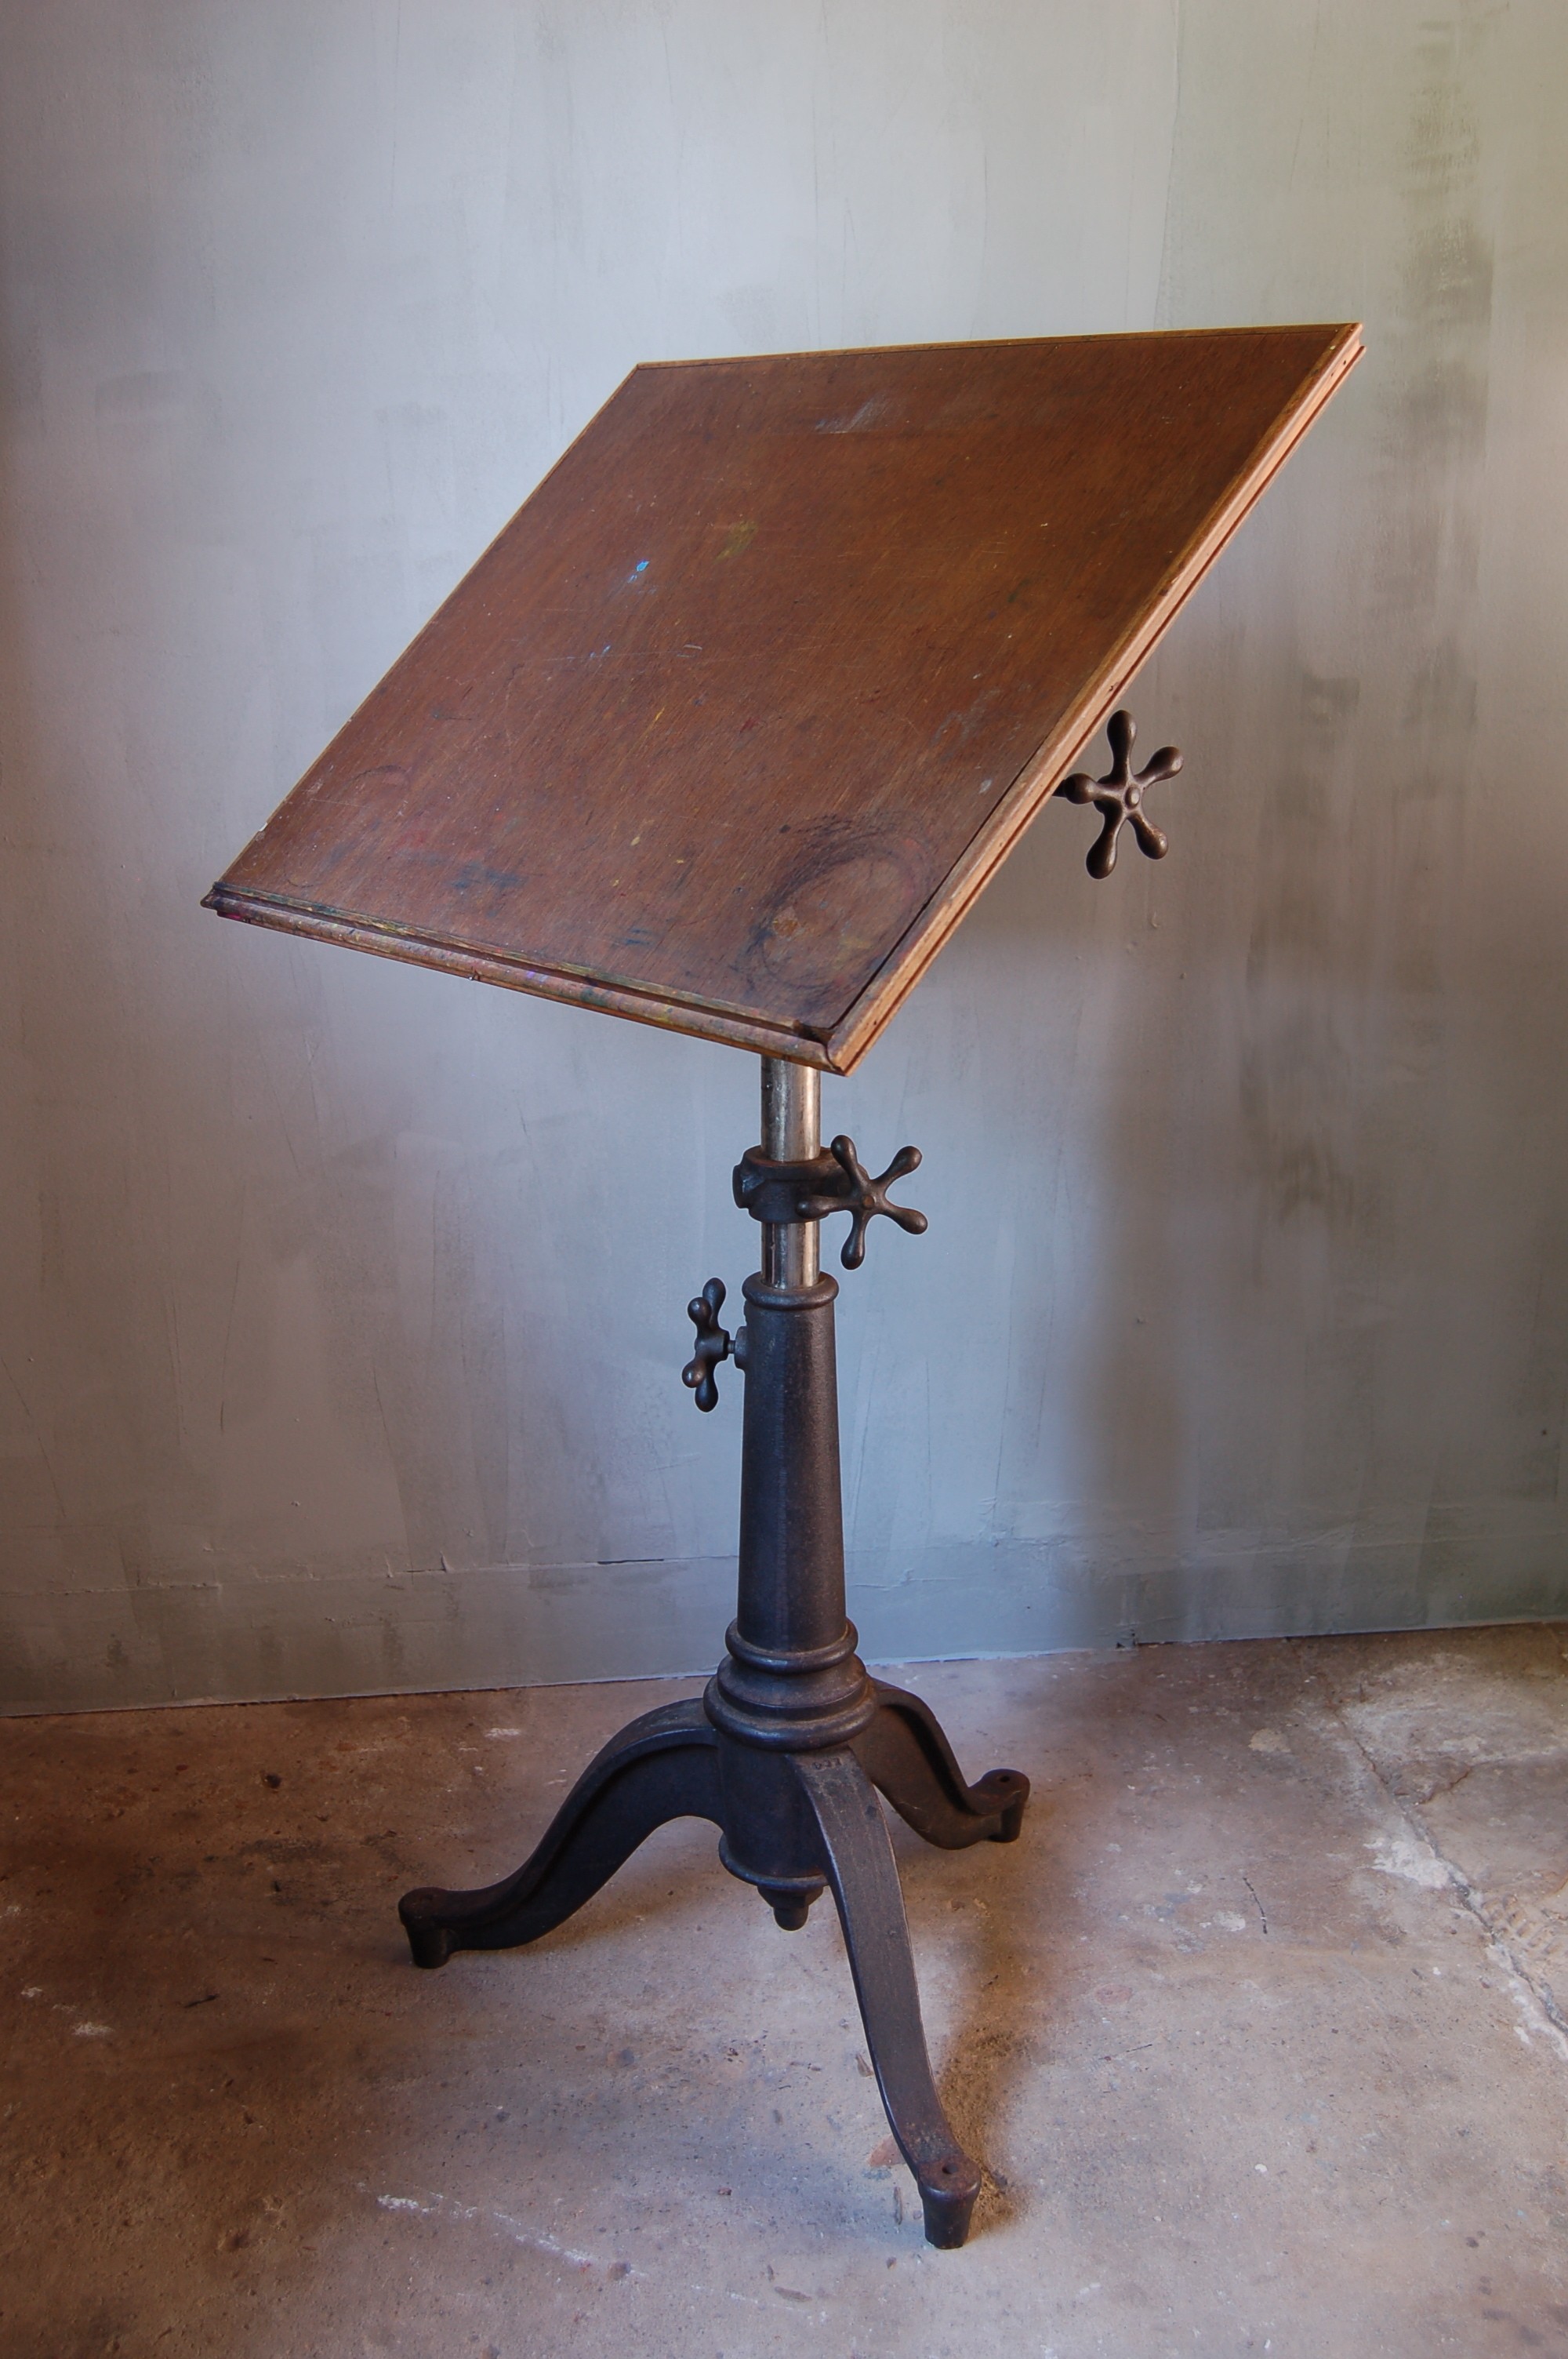 Vintage industrial drafting table with